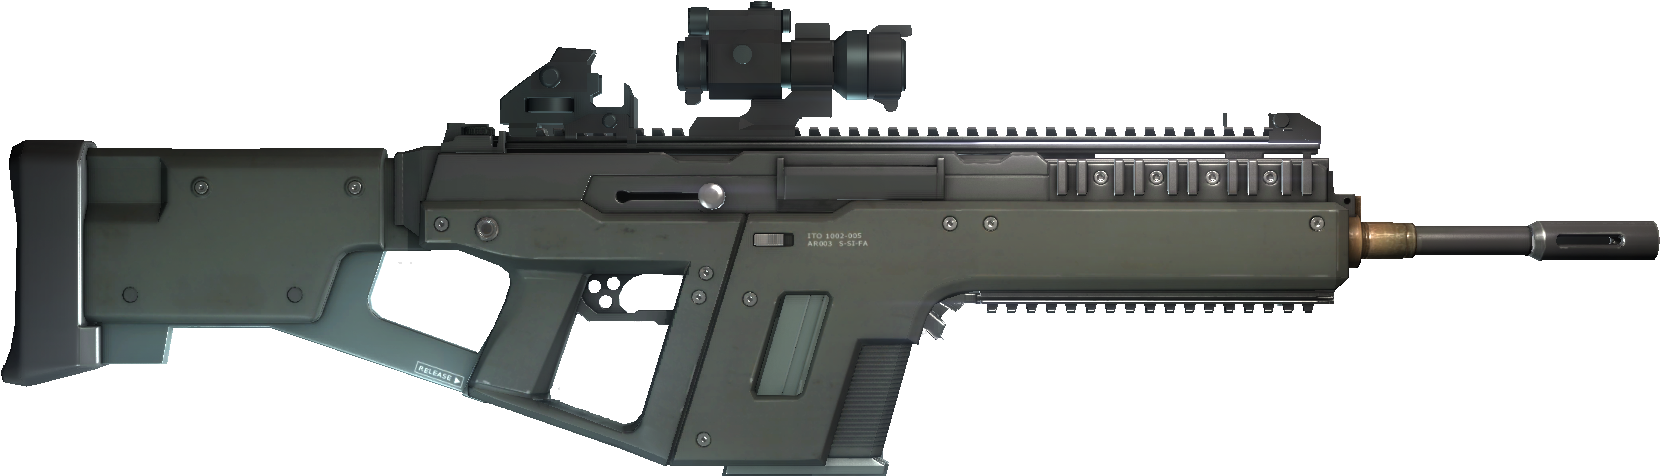 Assault Rifle Background PNG